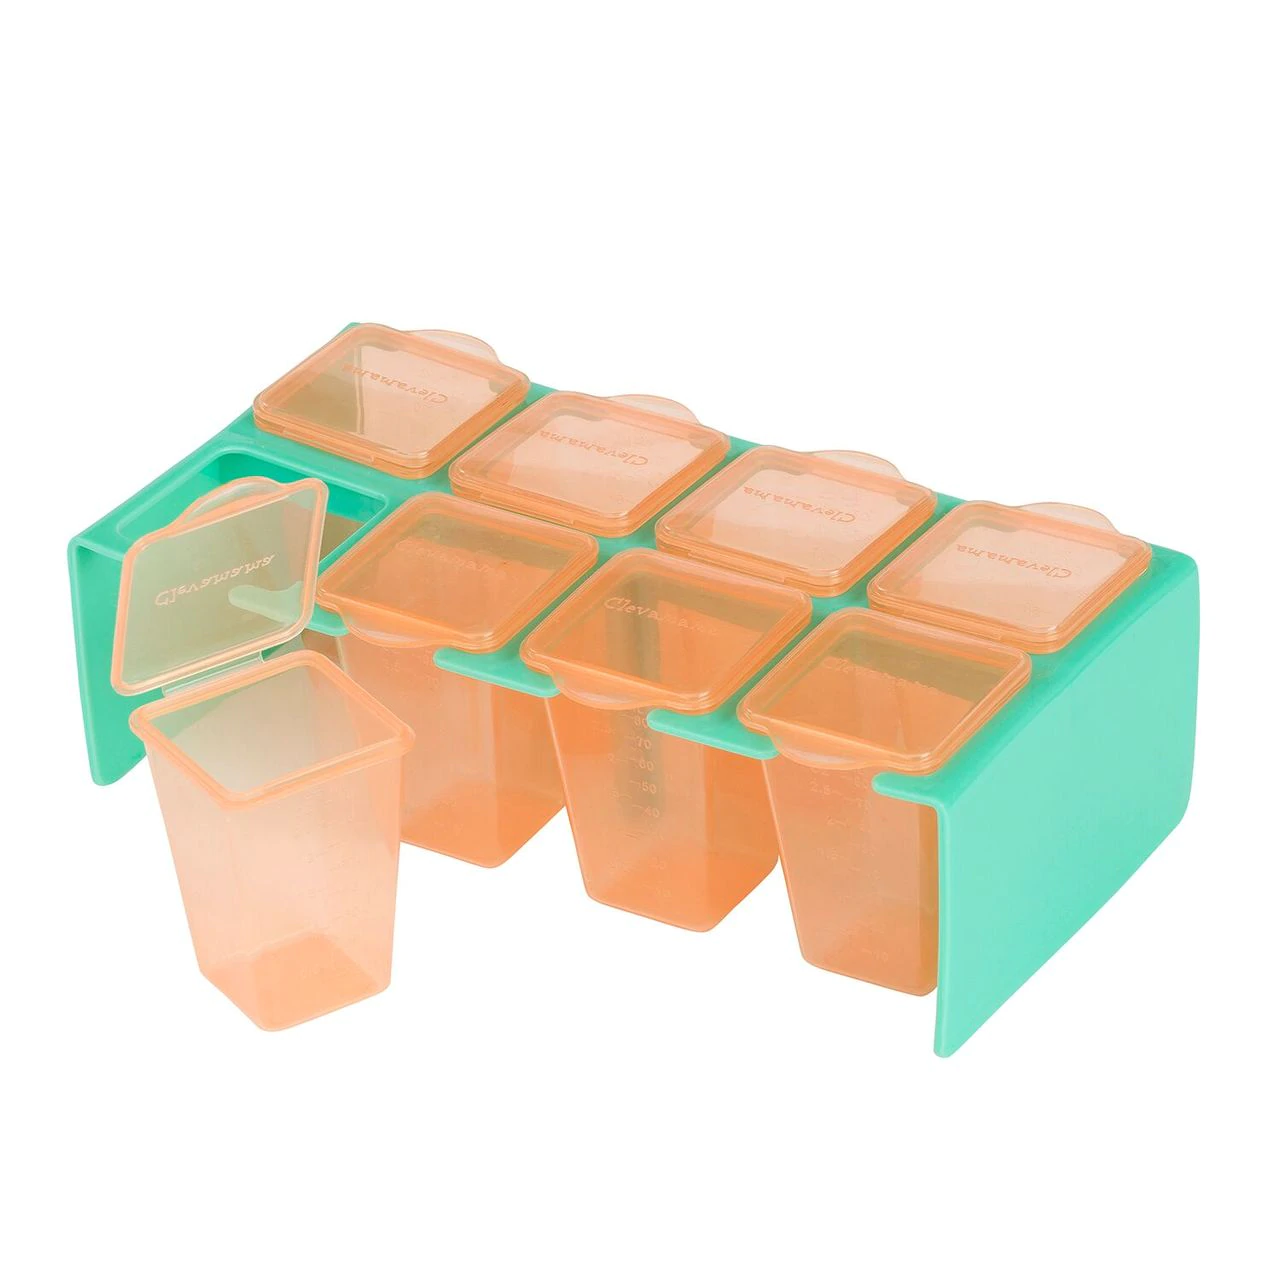 Clevamama Clevaportions Freezer & Food Storage Pots (Delivery after 30 June)